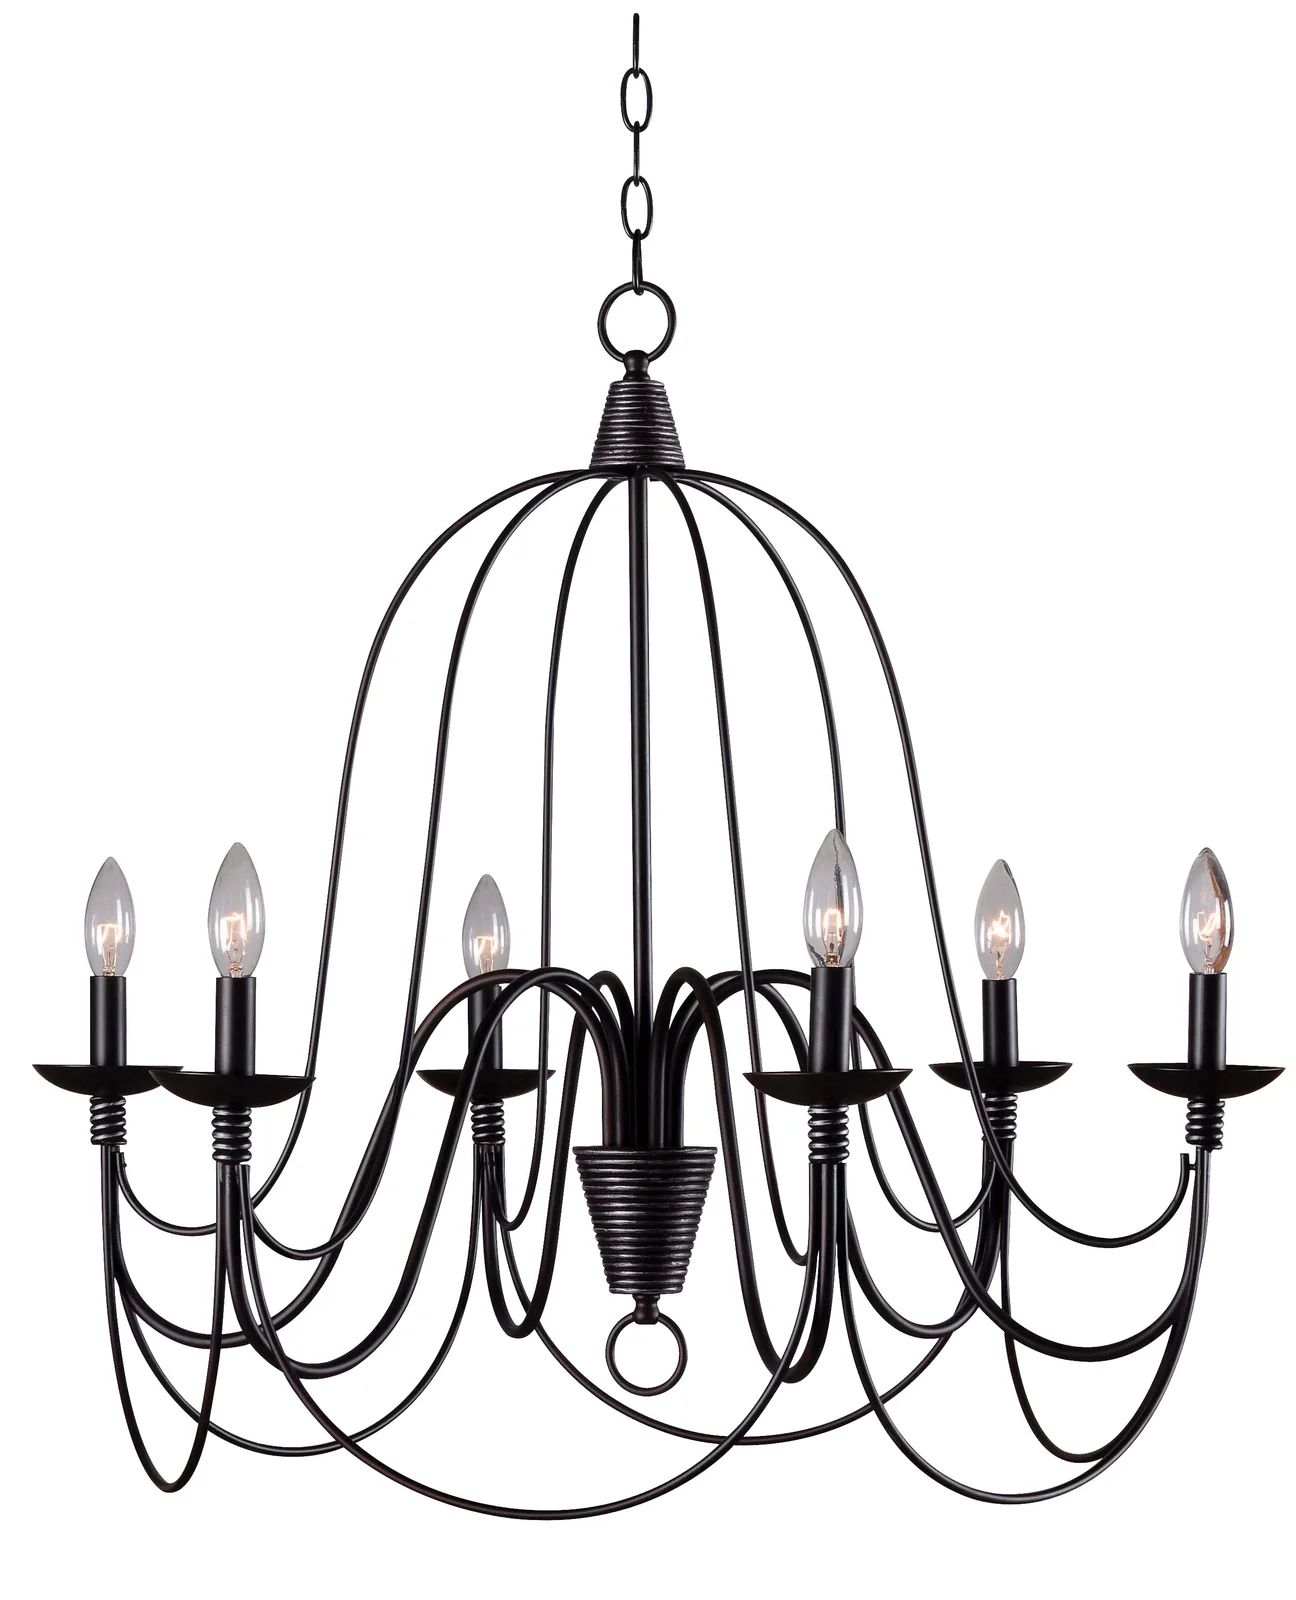 Resler 6 - Light Candle Style Empire Chandelier | Wayfair North America